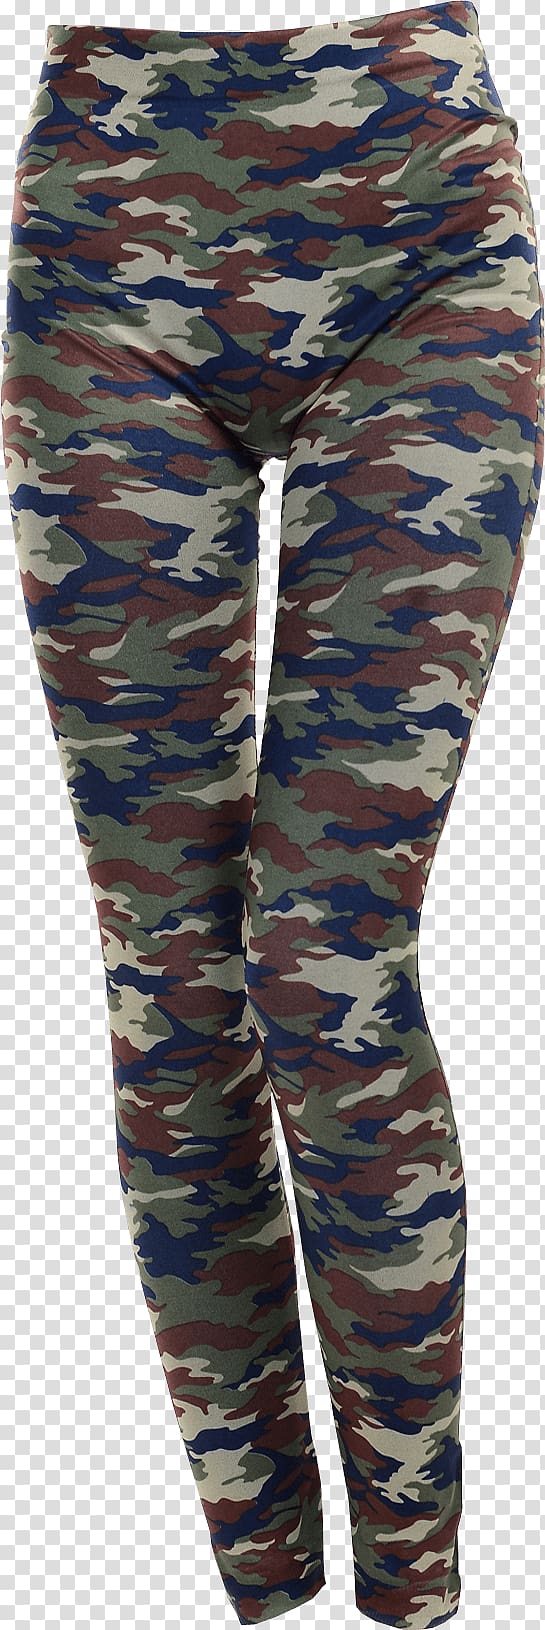 Leggings Military camouflage Yoga pants Jeggings, CAMOUFLAGE transparent background PNG clipart